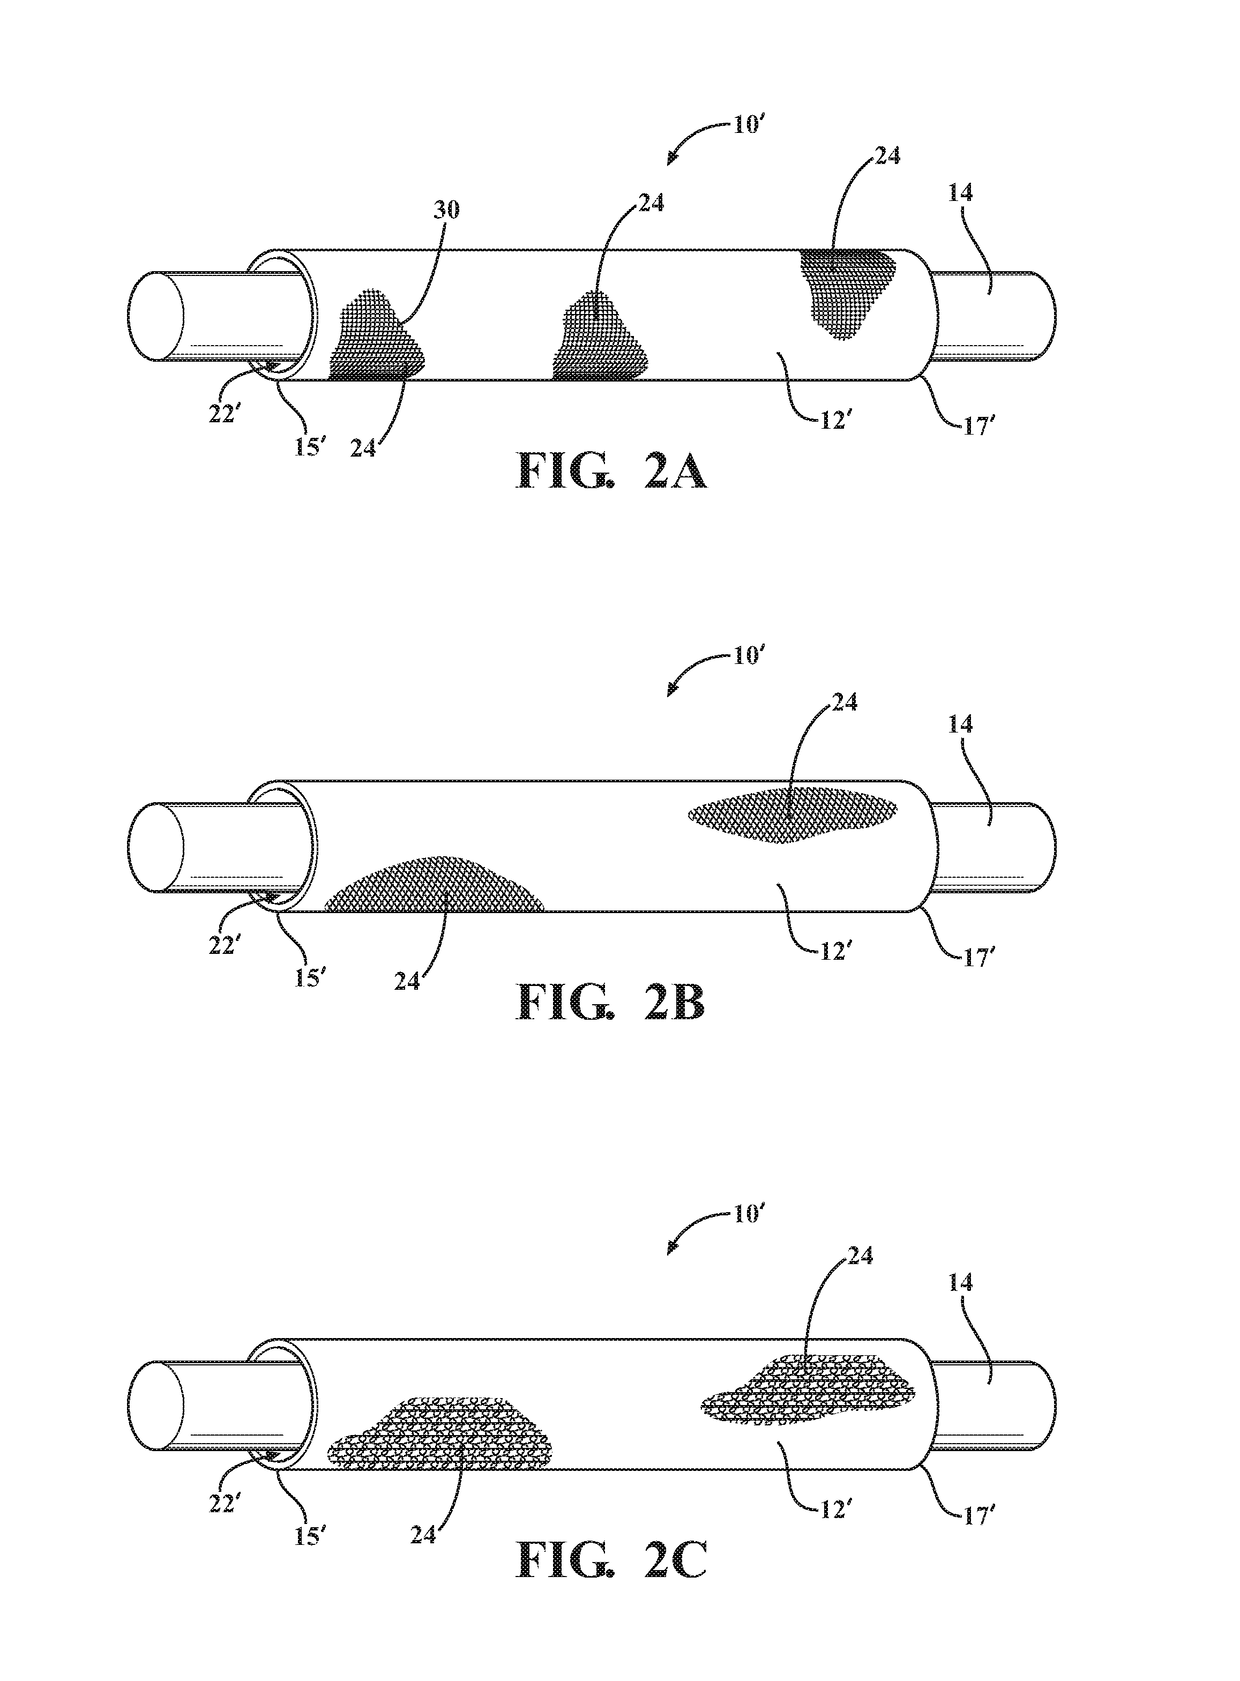 Abrasion resistant textile sleeve, improved multifilament yarn therefor and methods of construction thereof